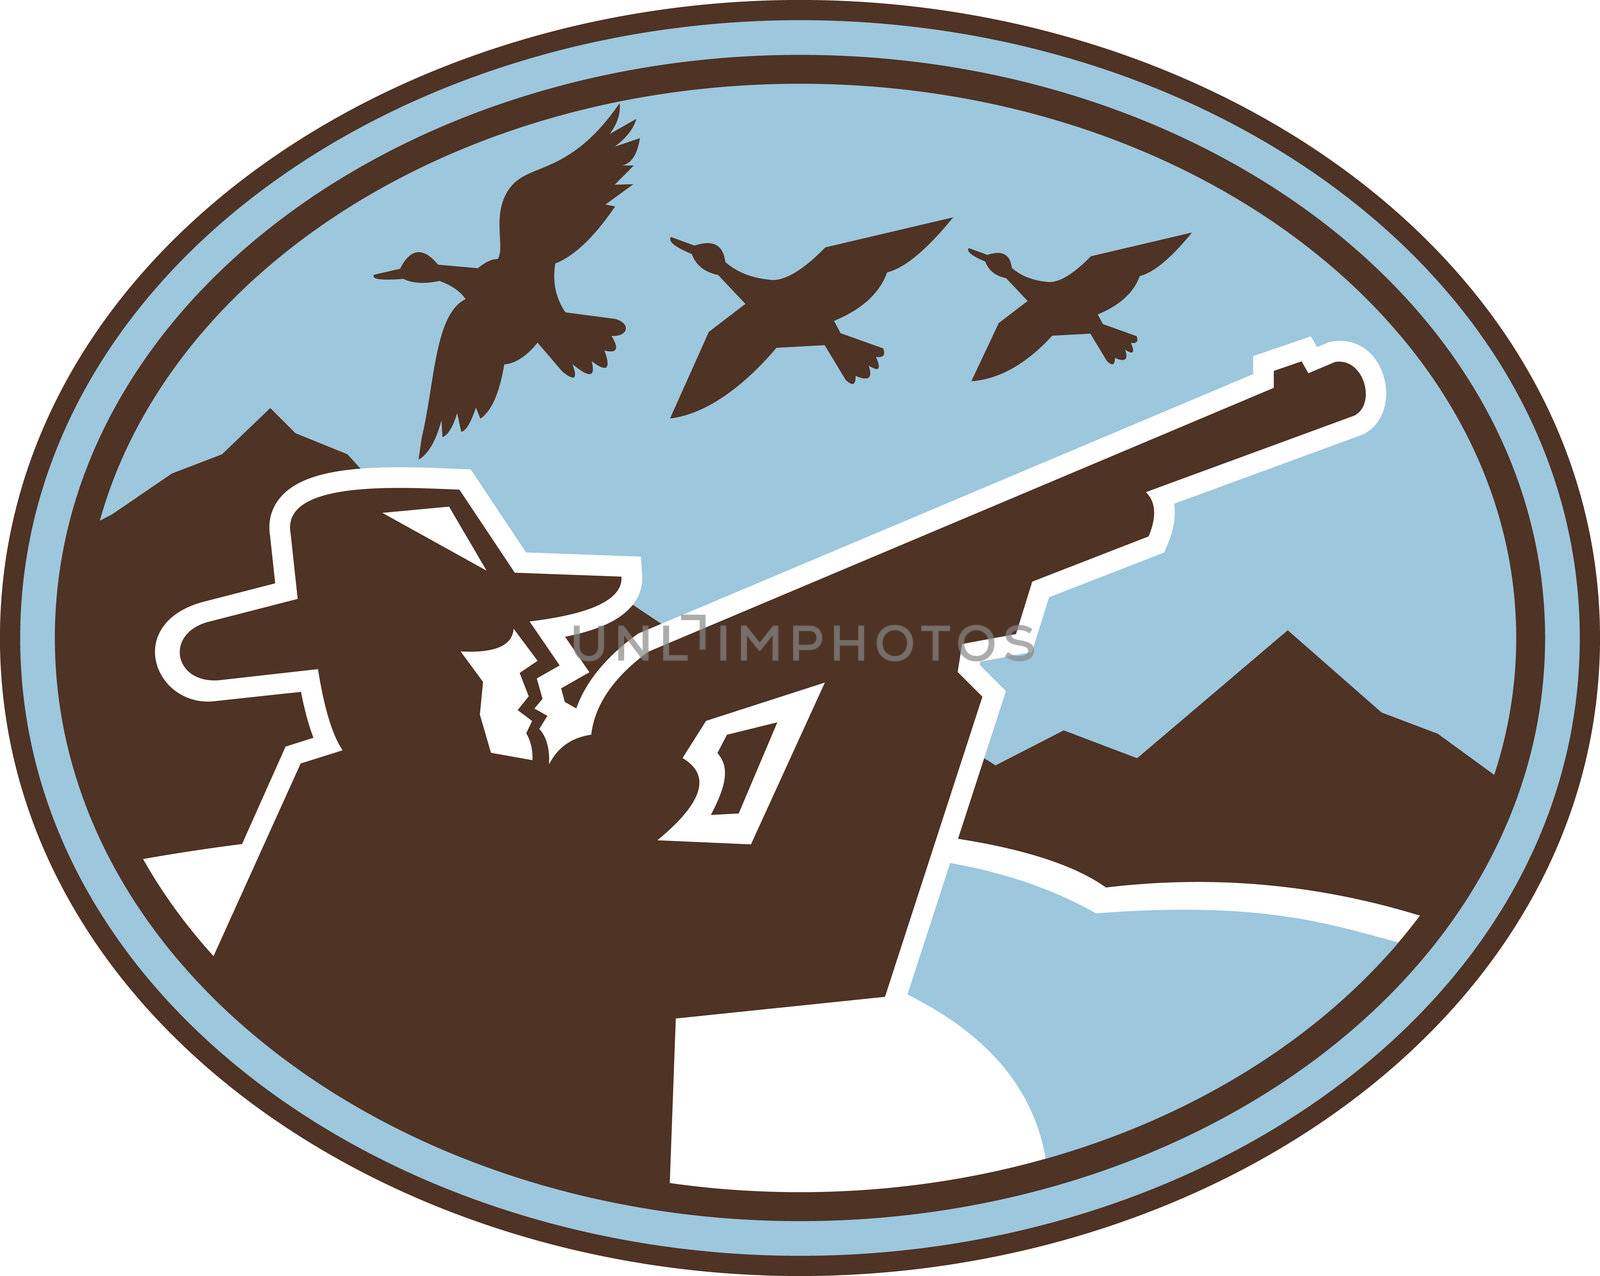 Imagery shows a Hunter aiming his shotgun viewed from side with ducks flying in the background enclosed in an ellipse. Done in two (2) colors.